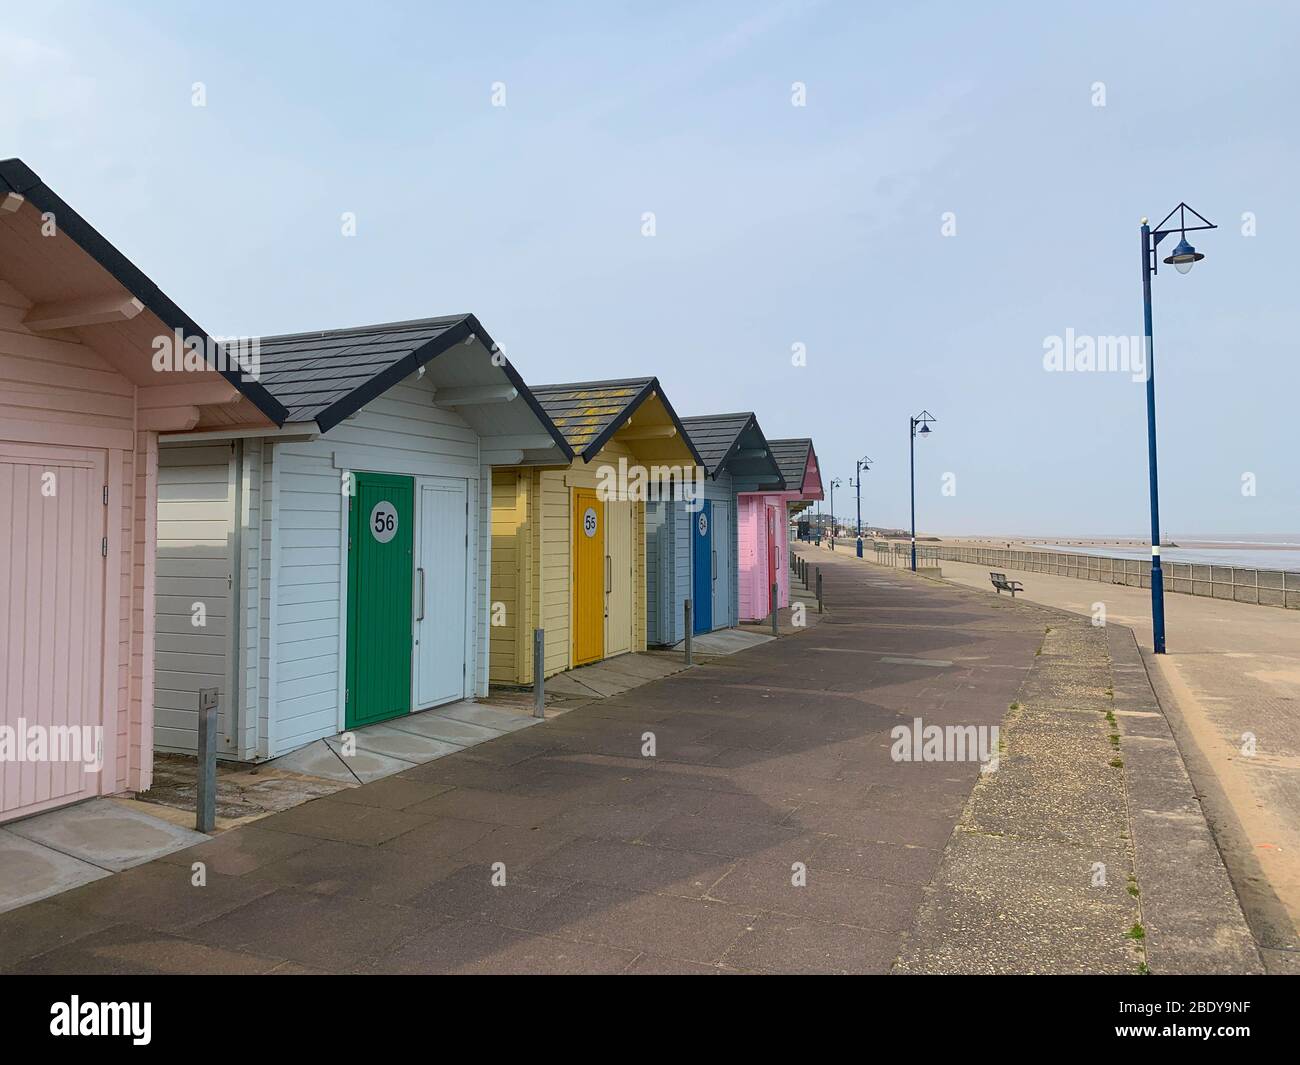 Mablethorpe, Lincolnshire,  UK. 10th April 2020. The deserted South Beach seaside promenade and beach huts of Mablethorpe, usually full of day trippers on a Good Friday. Credit: Tim Ring/Alamy Live News Stock Photo